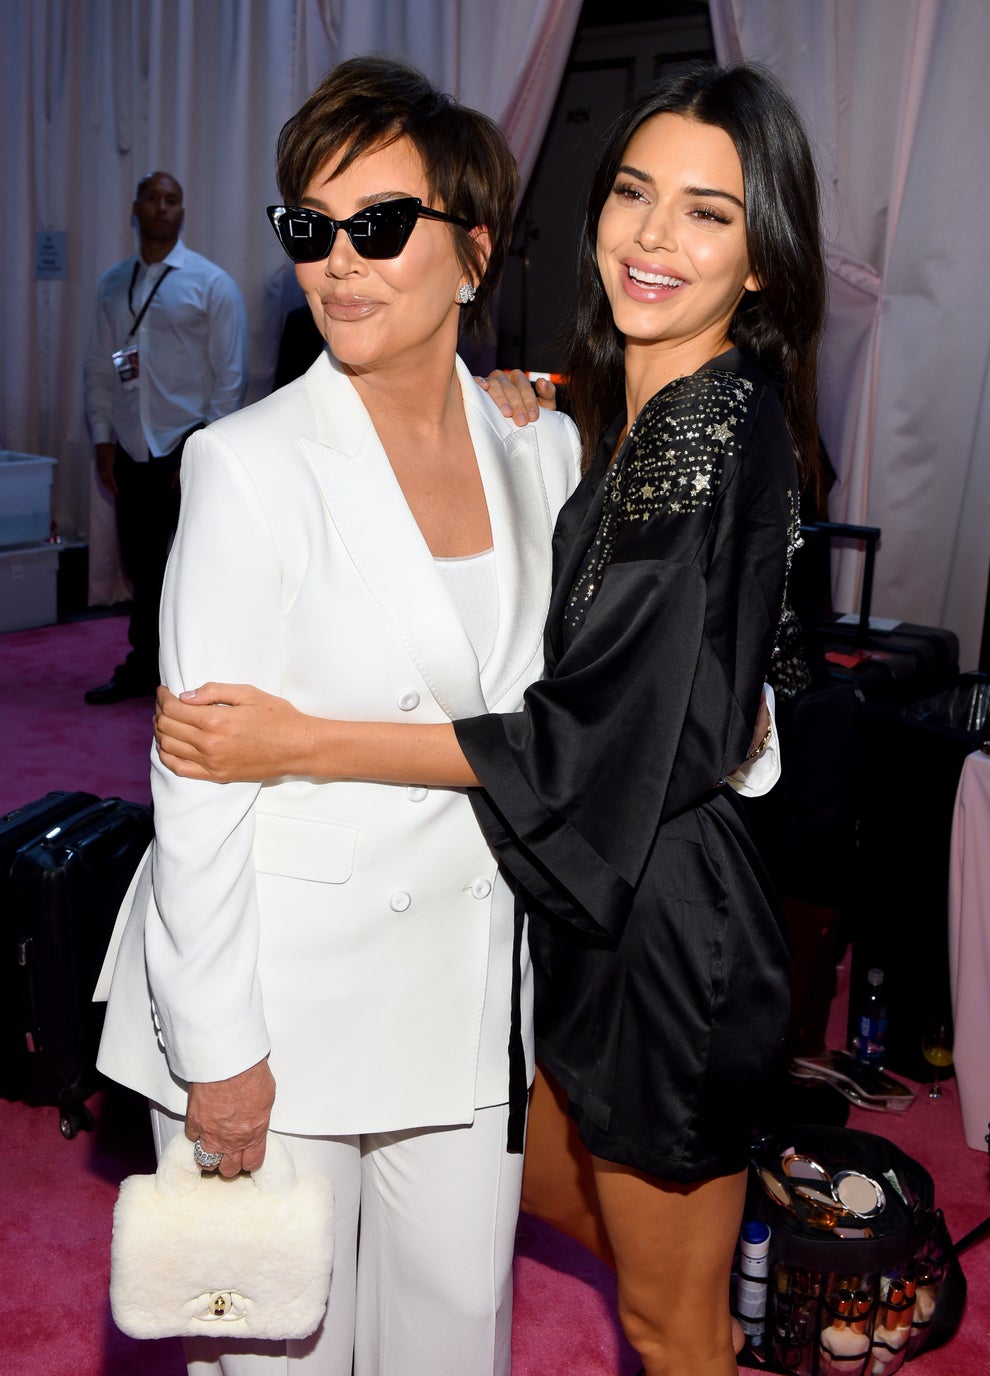 Kris Jenner Phoned Her Doctor To Convince Kendall Jenner To Have Kids